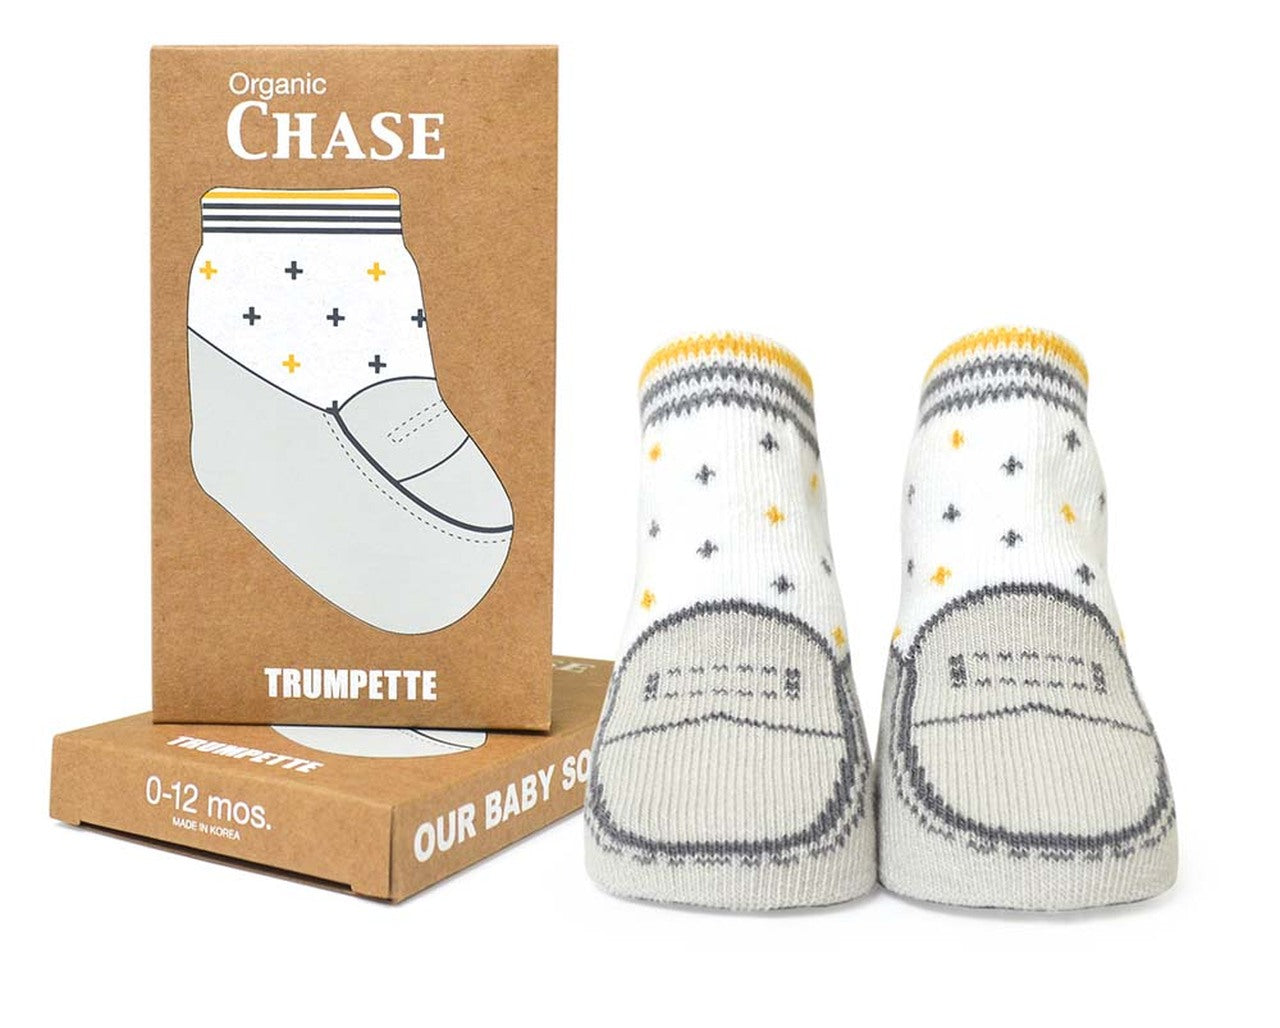 Trumpette Organic Cotton Chase Gray Socks, 1 Pack